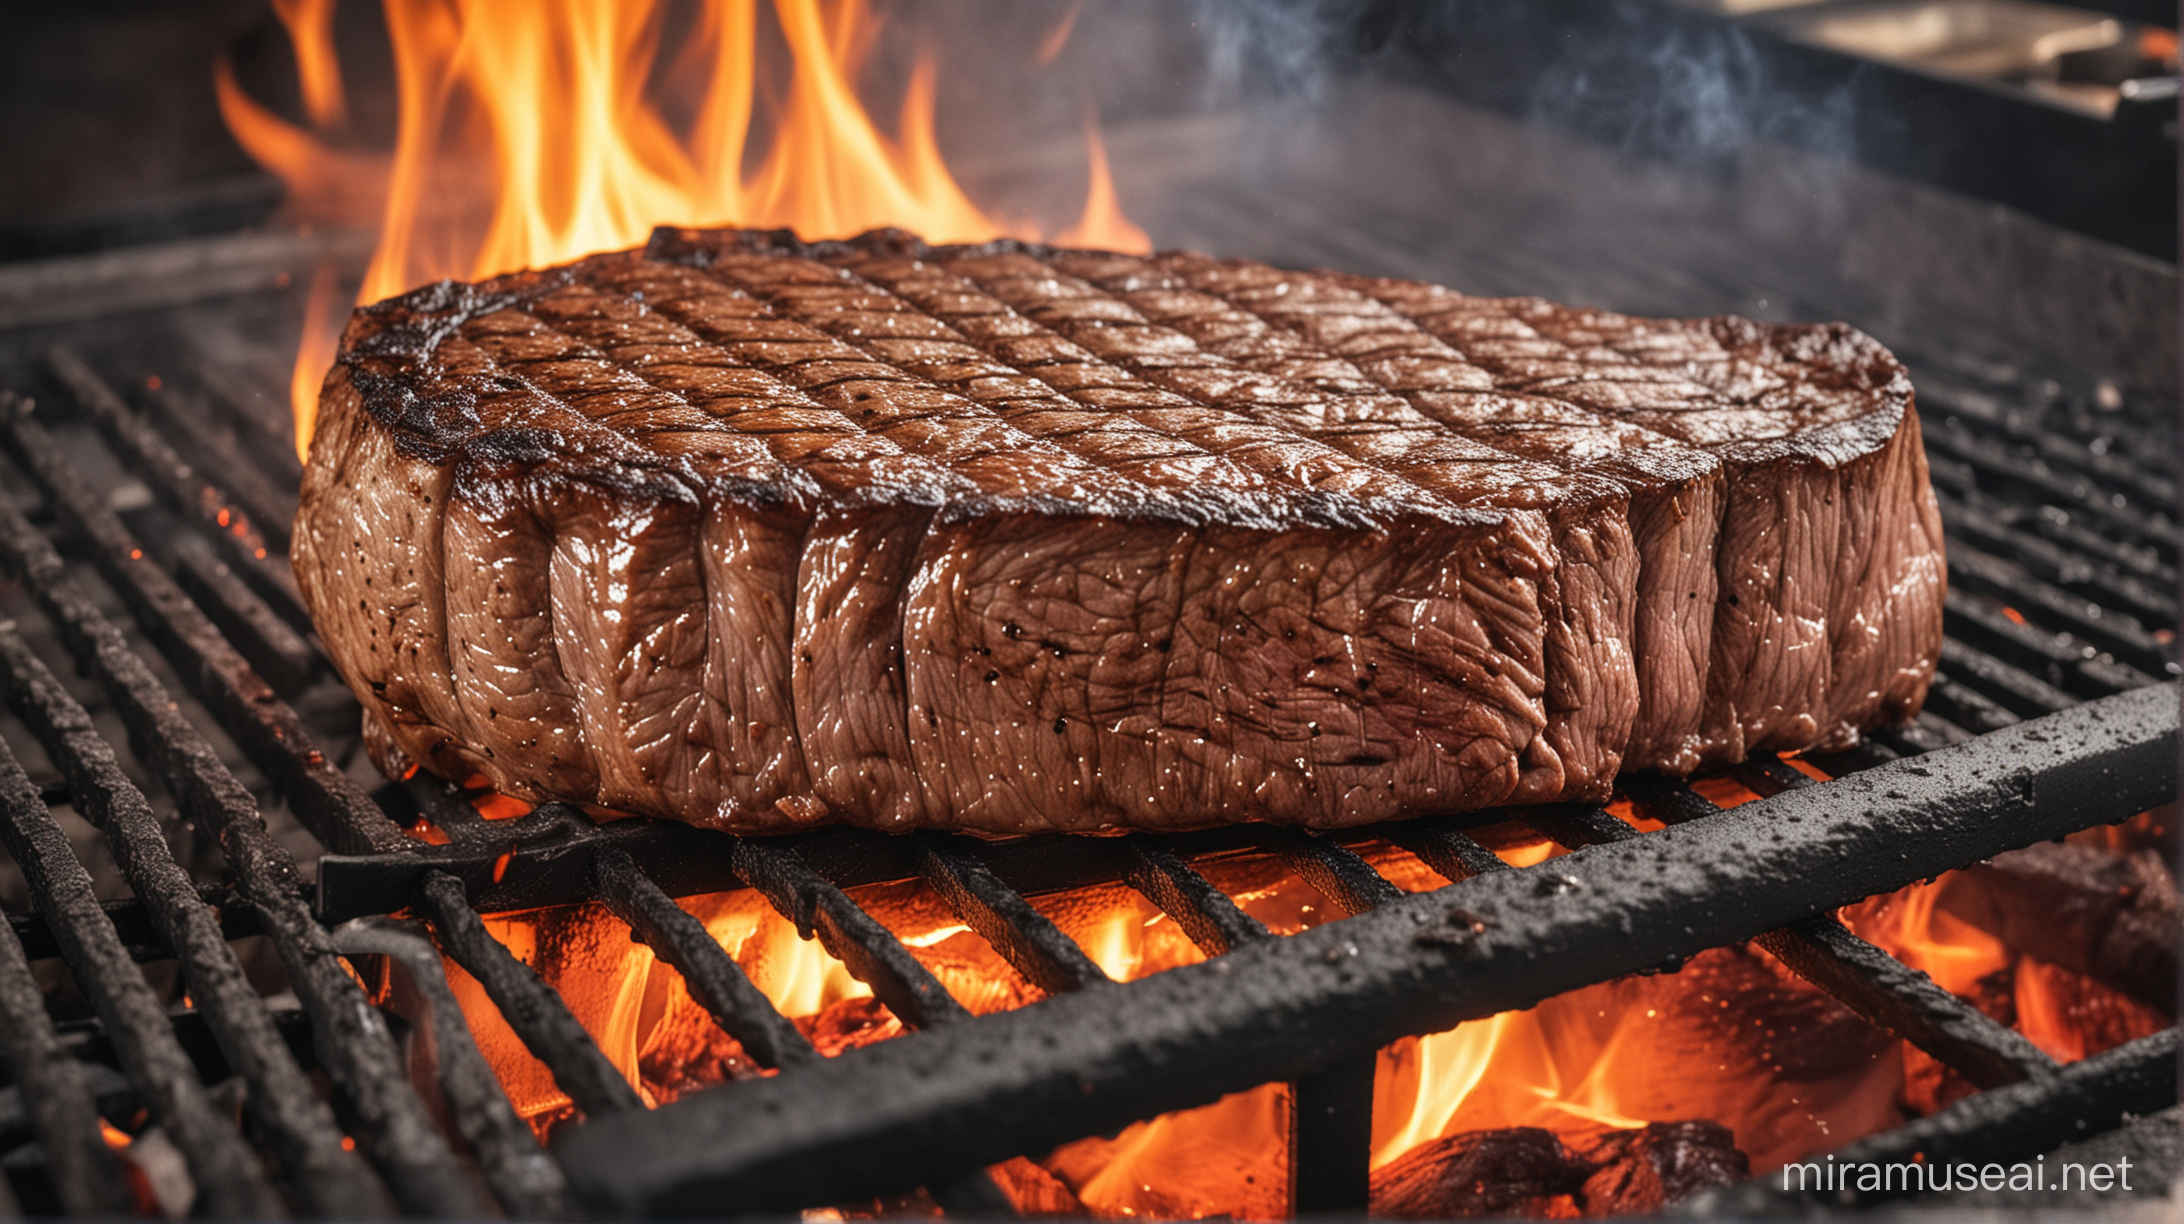 One thick juicy steak  on an open fire grill in a busy restaurant kitchen